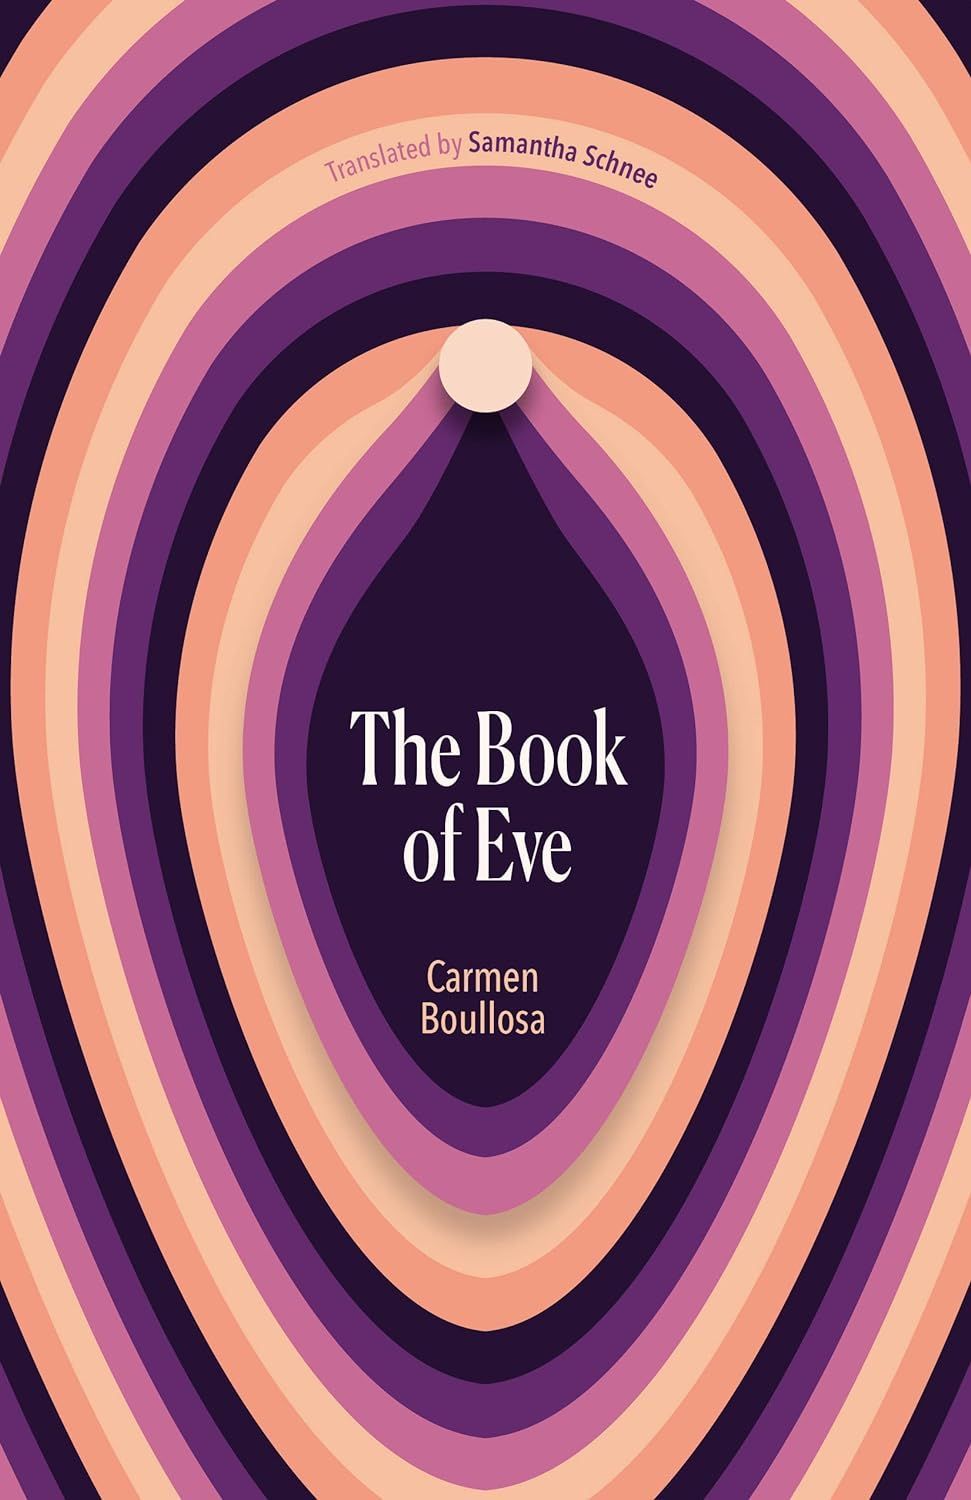 Story Thieves: On Carmen Boullosa’s “The Book of Eve”